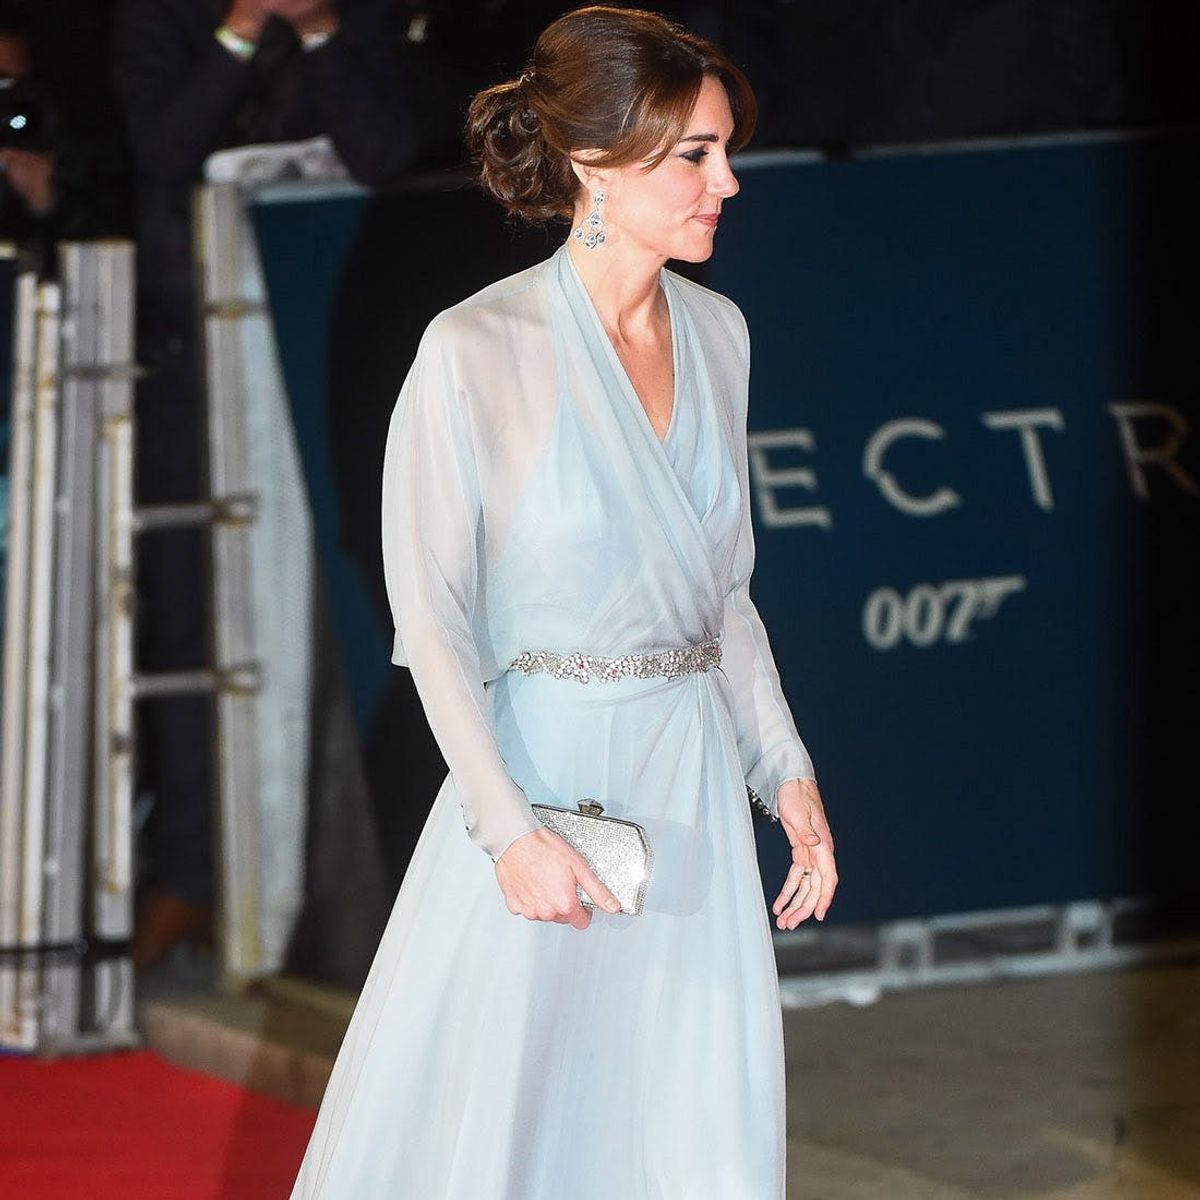 How to Copy Kate Middleton’s Red Carpet Fairytale Style